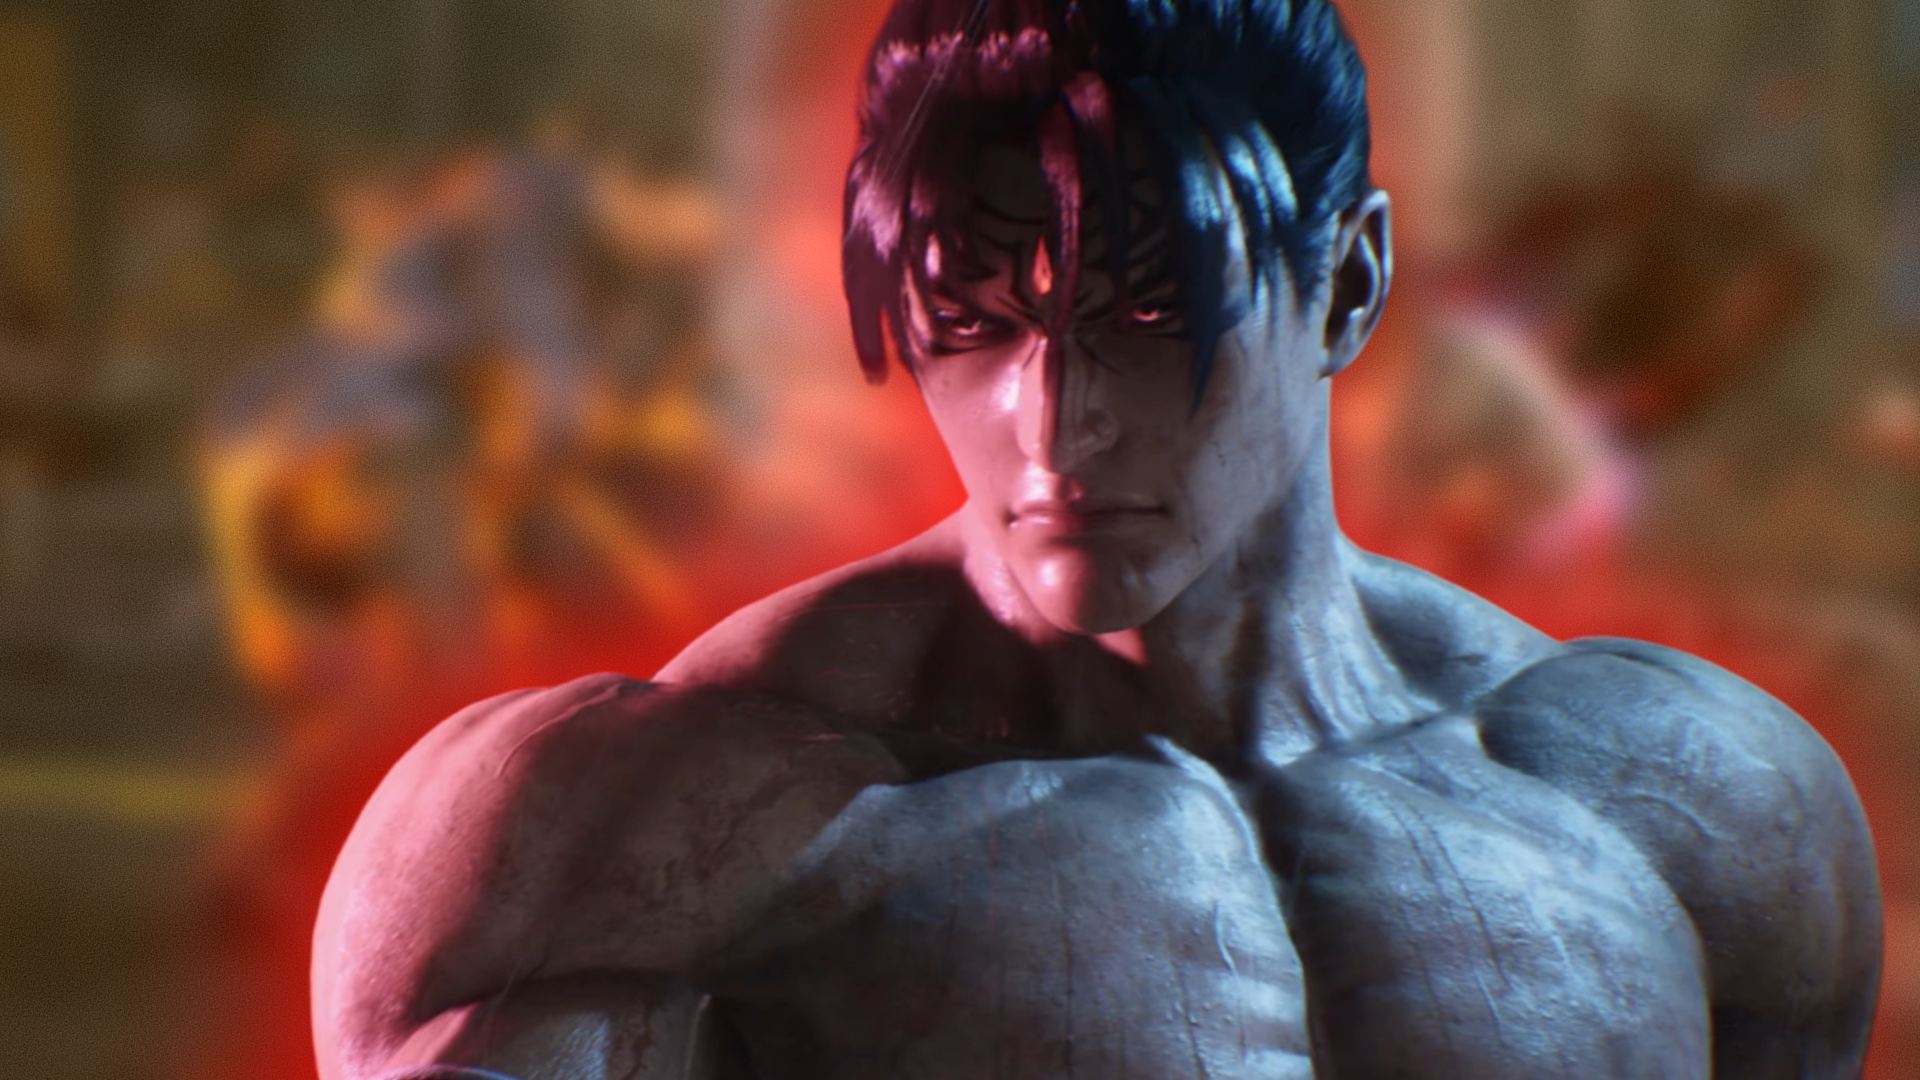 Everything about Tekken 8 release date, story, gameplay